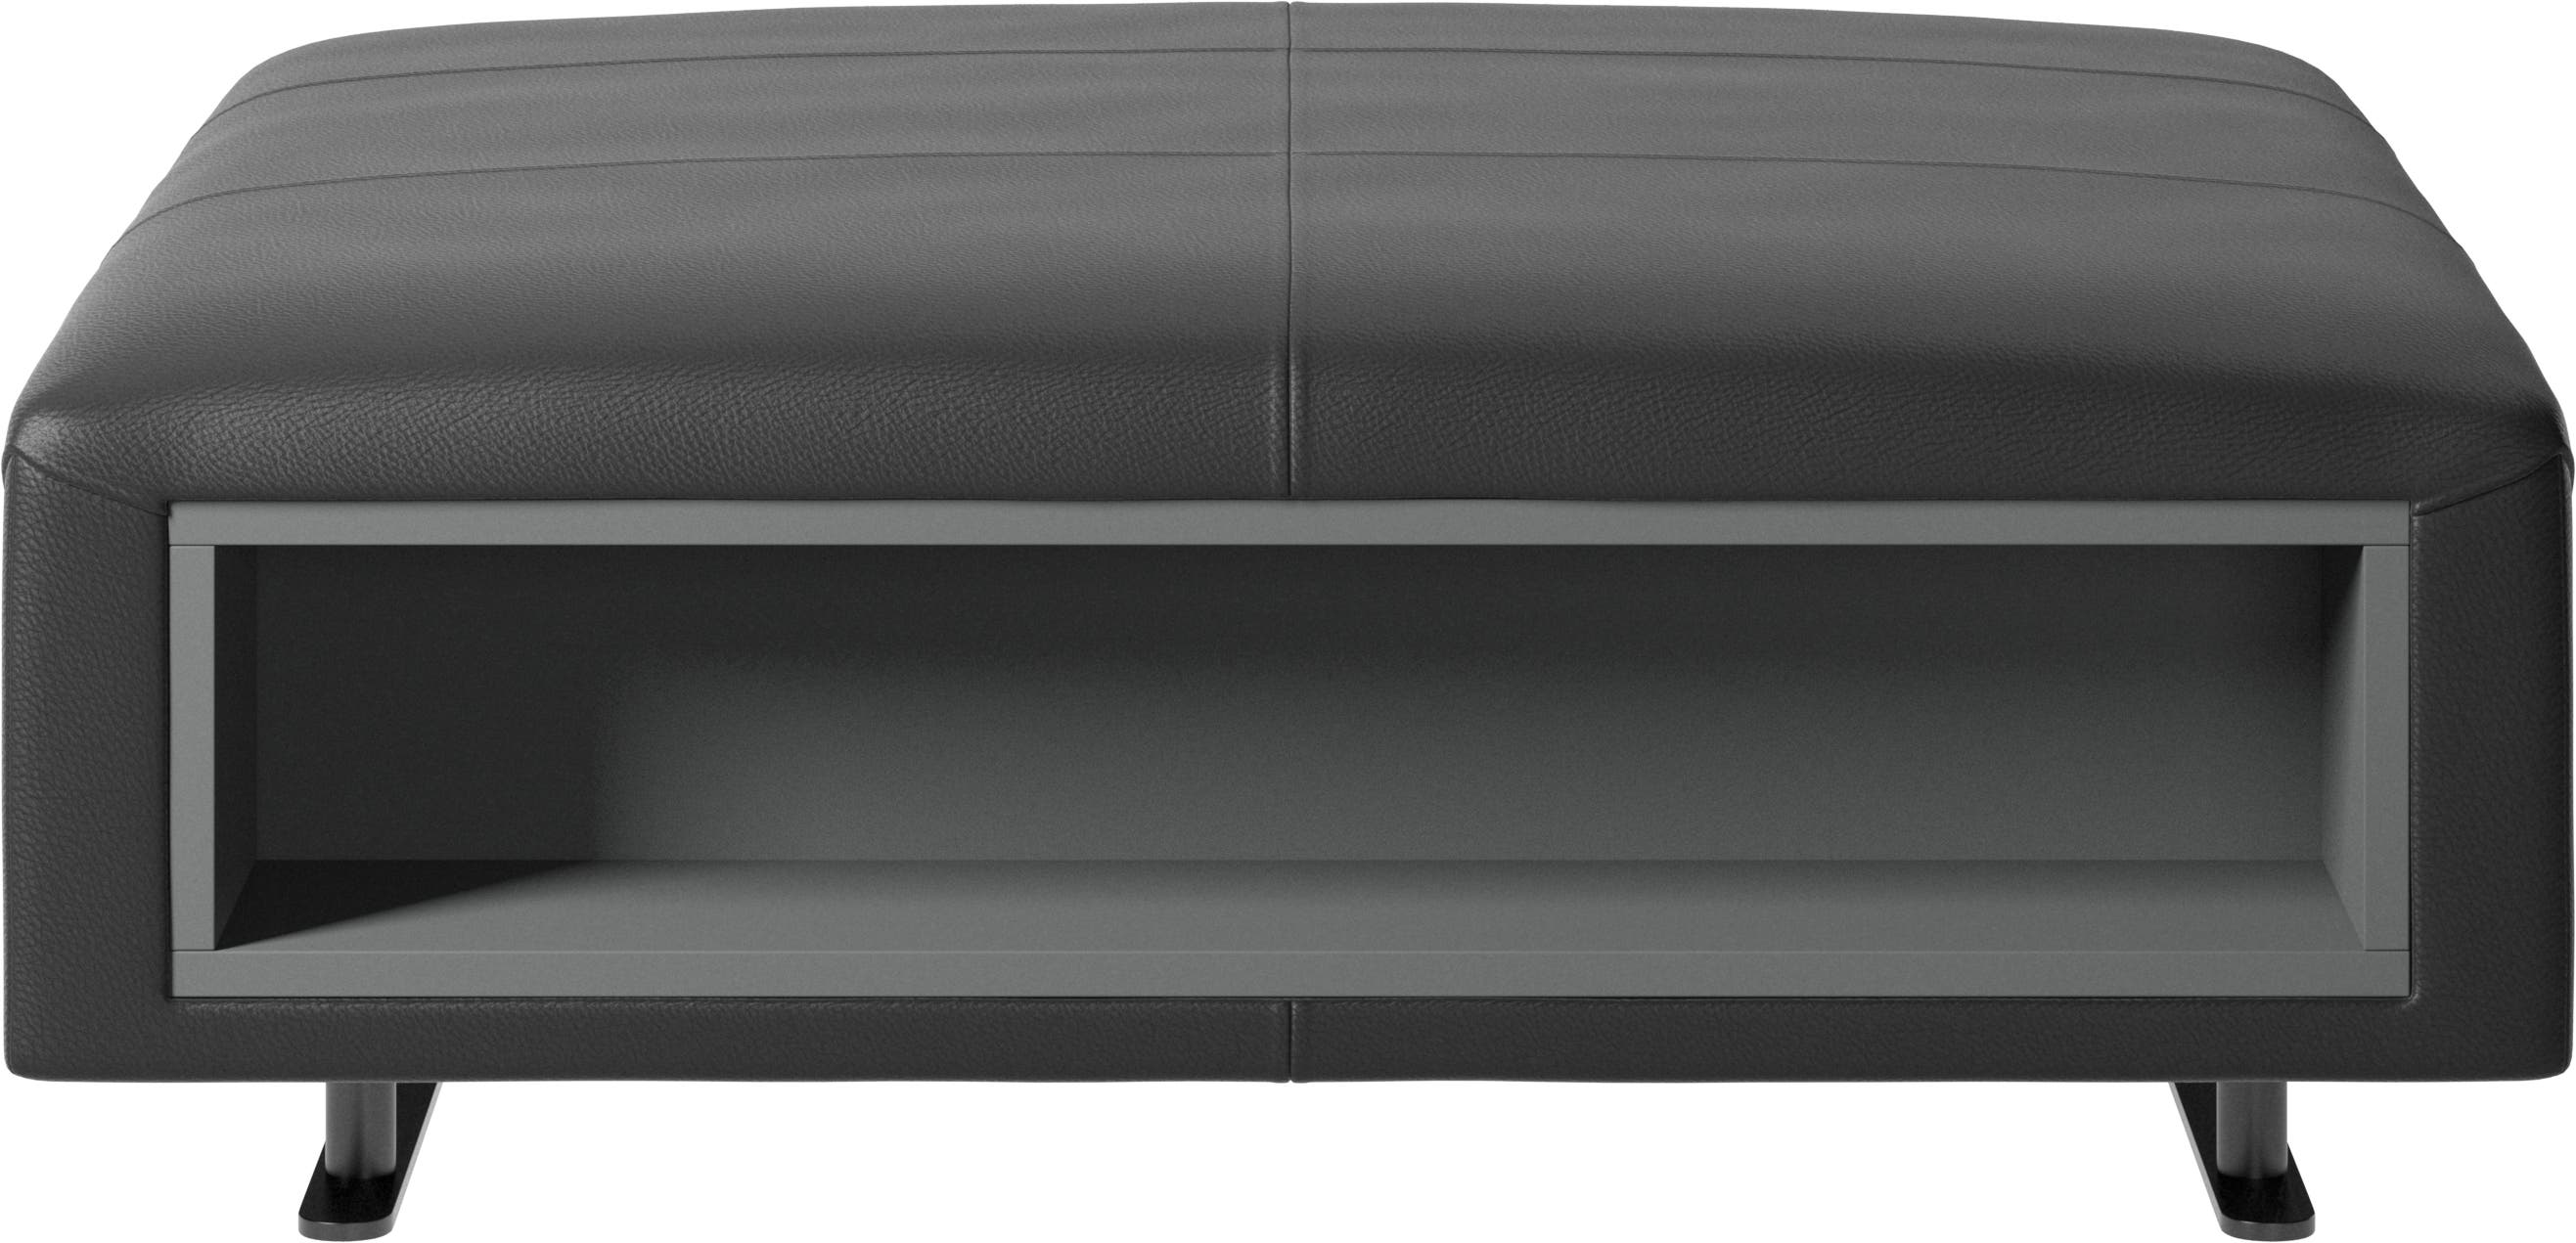 Hampton pouf with storage left and right sides